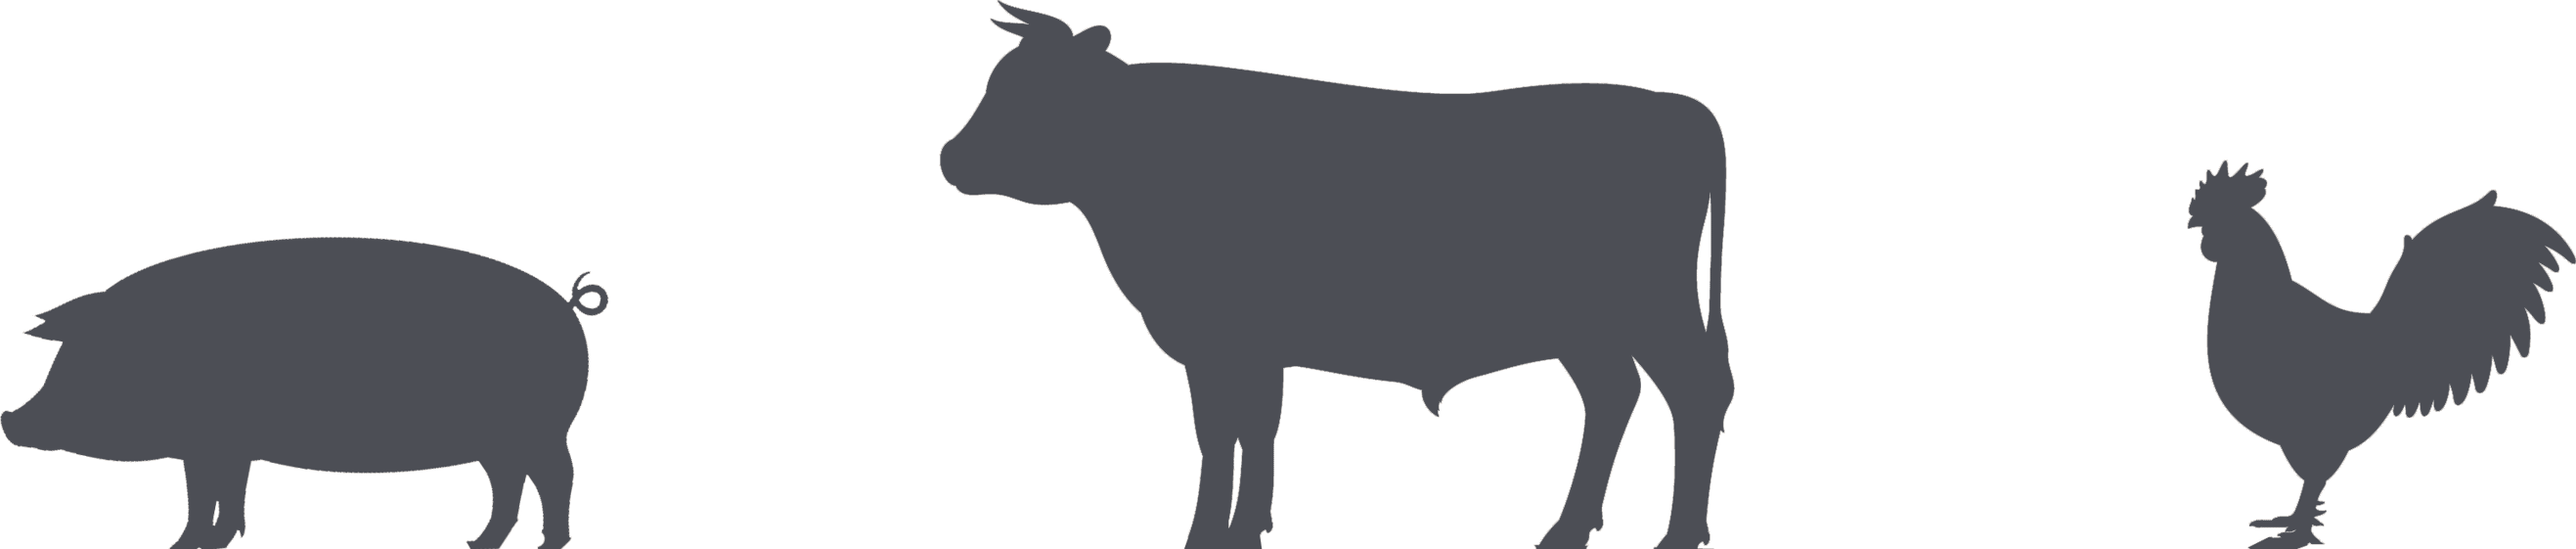 Cows clipart bbq, Cows bbq Transparent FREE for download on